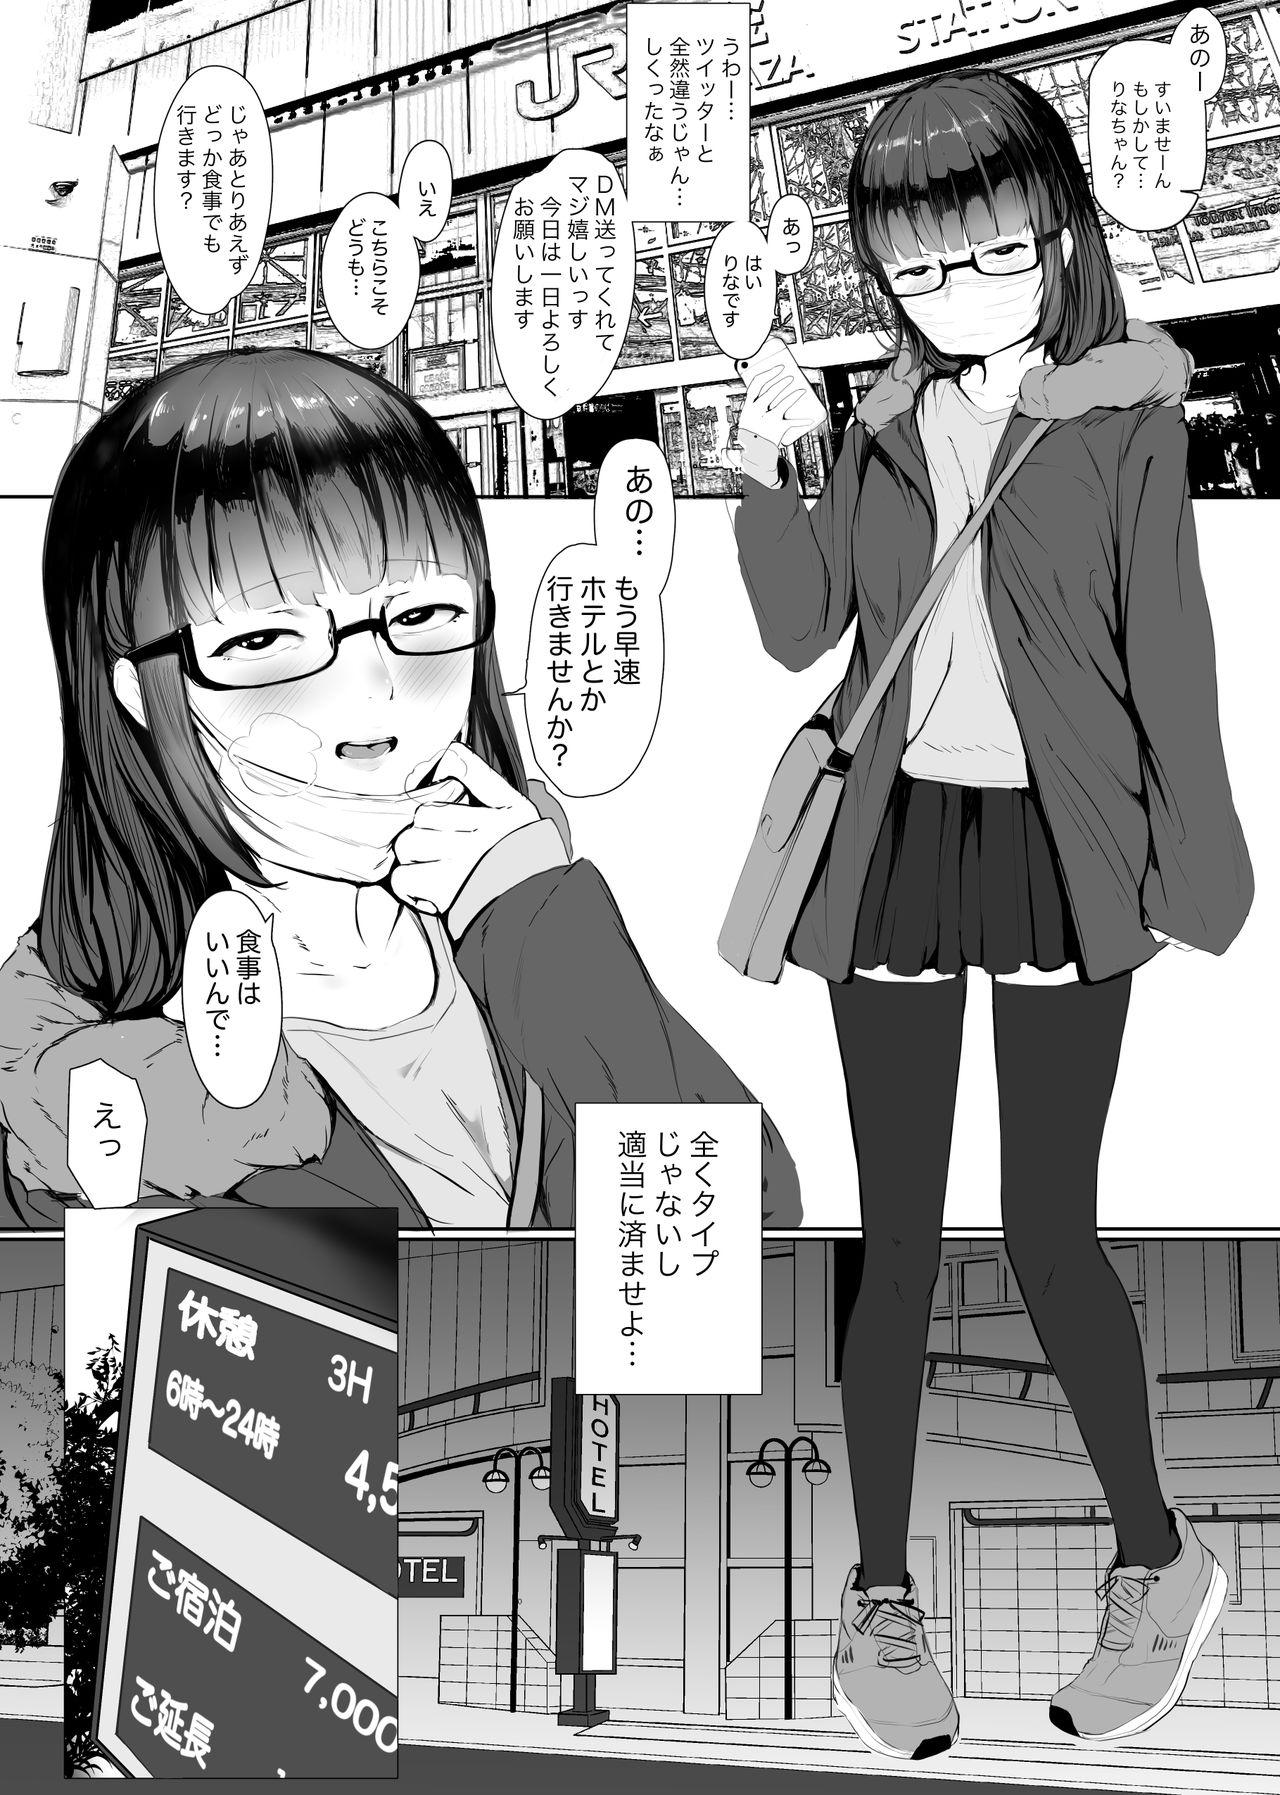 Casal SNSに上がってる写真と全然違う印象の女の子が来た - Original Old Vs Young - Page 1